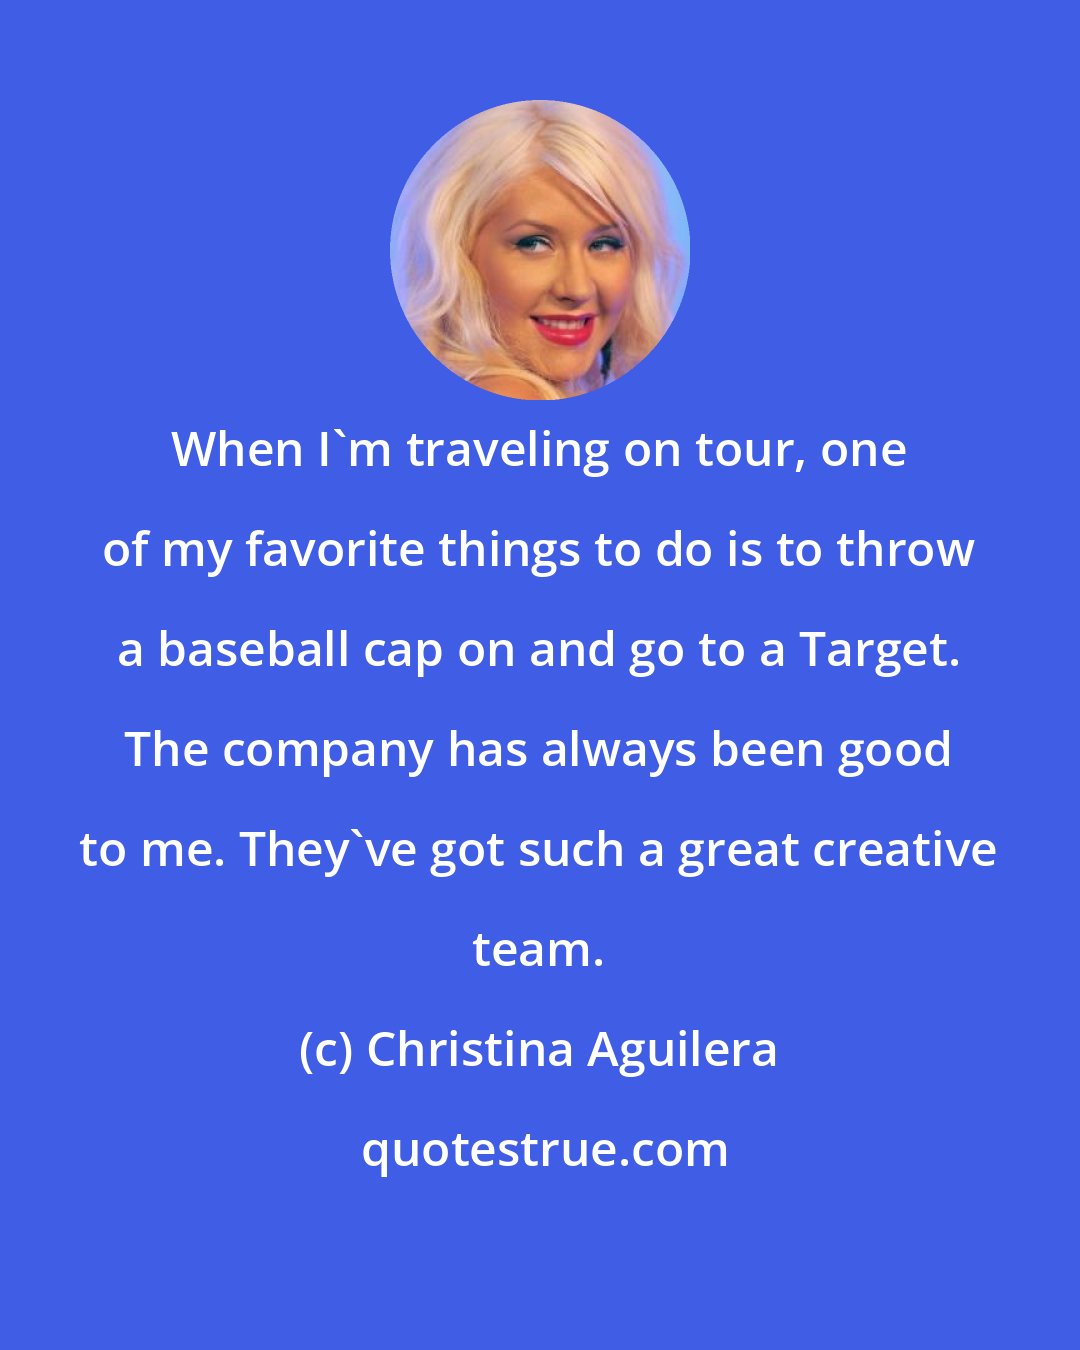 Christina Aguilera: When I'm traveling on tour, one of my favorite things to do is to throw a baseball cap on and go to a Target. The company has always been good to me. They've got such a great creative team.